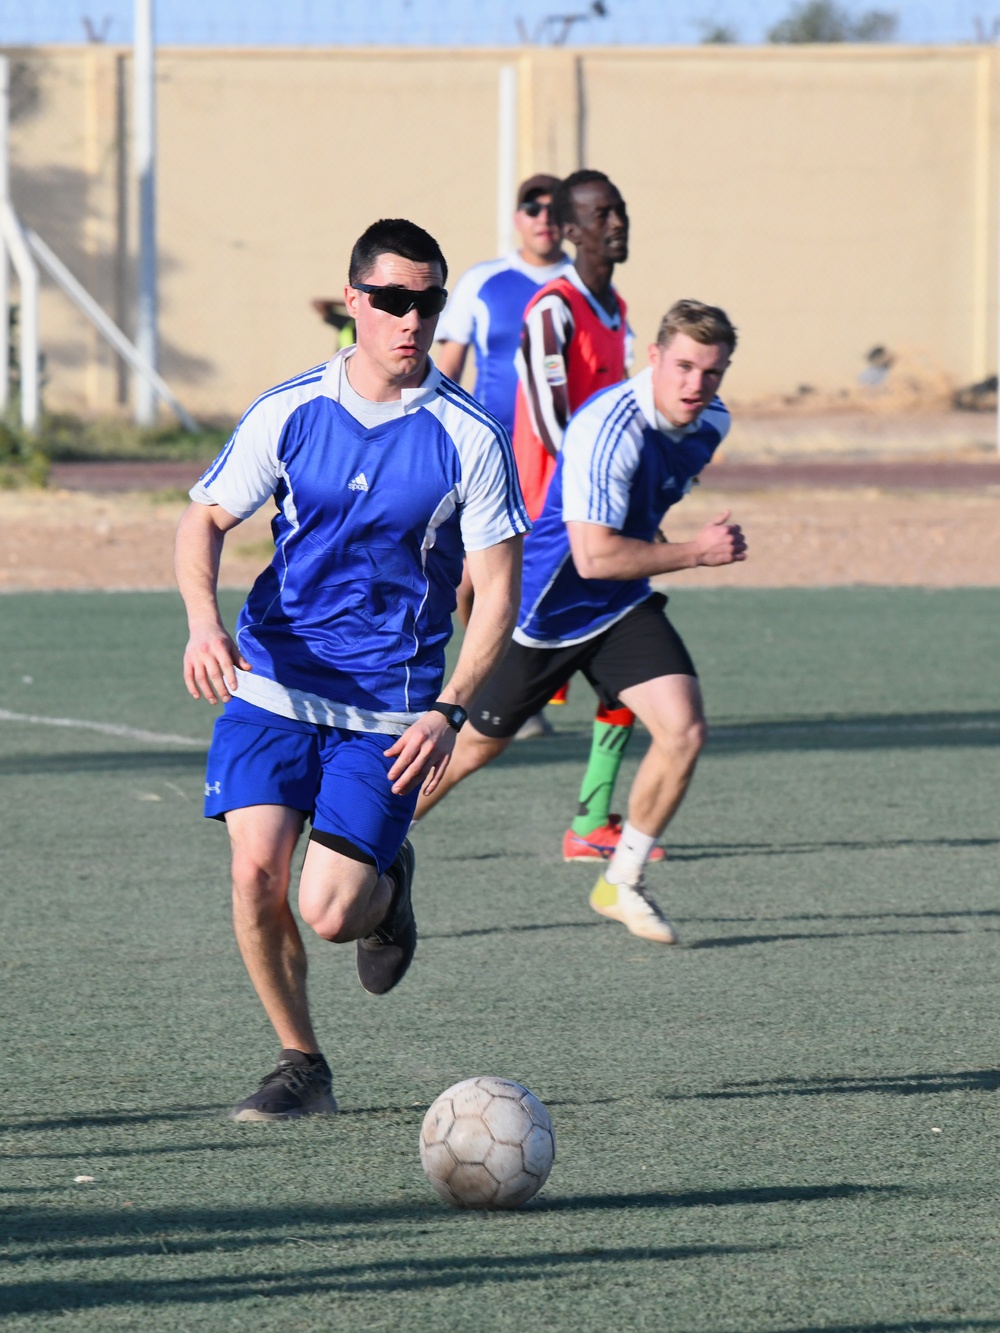 U.S. military, FAN personnel challenge local Agadez soccer team to exhibition match